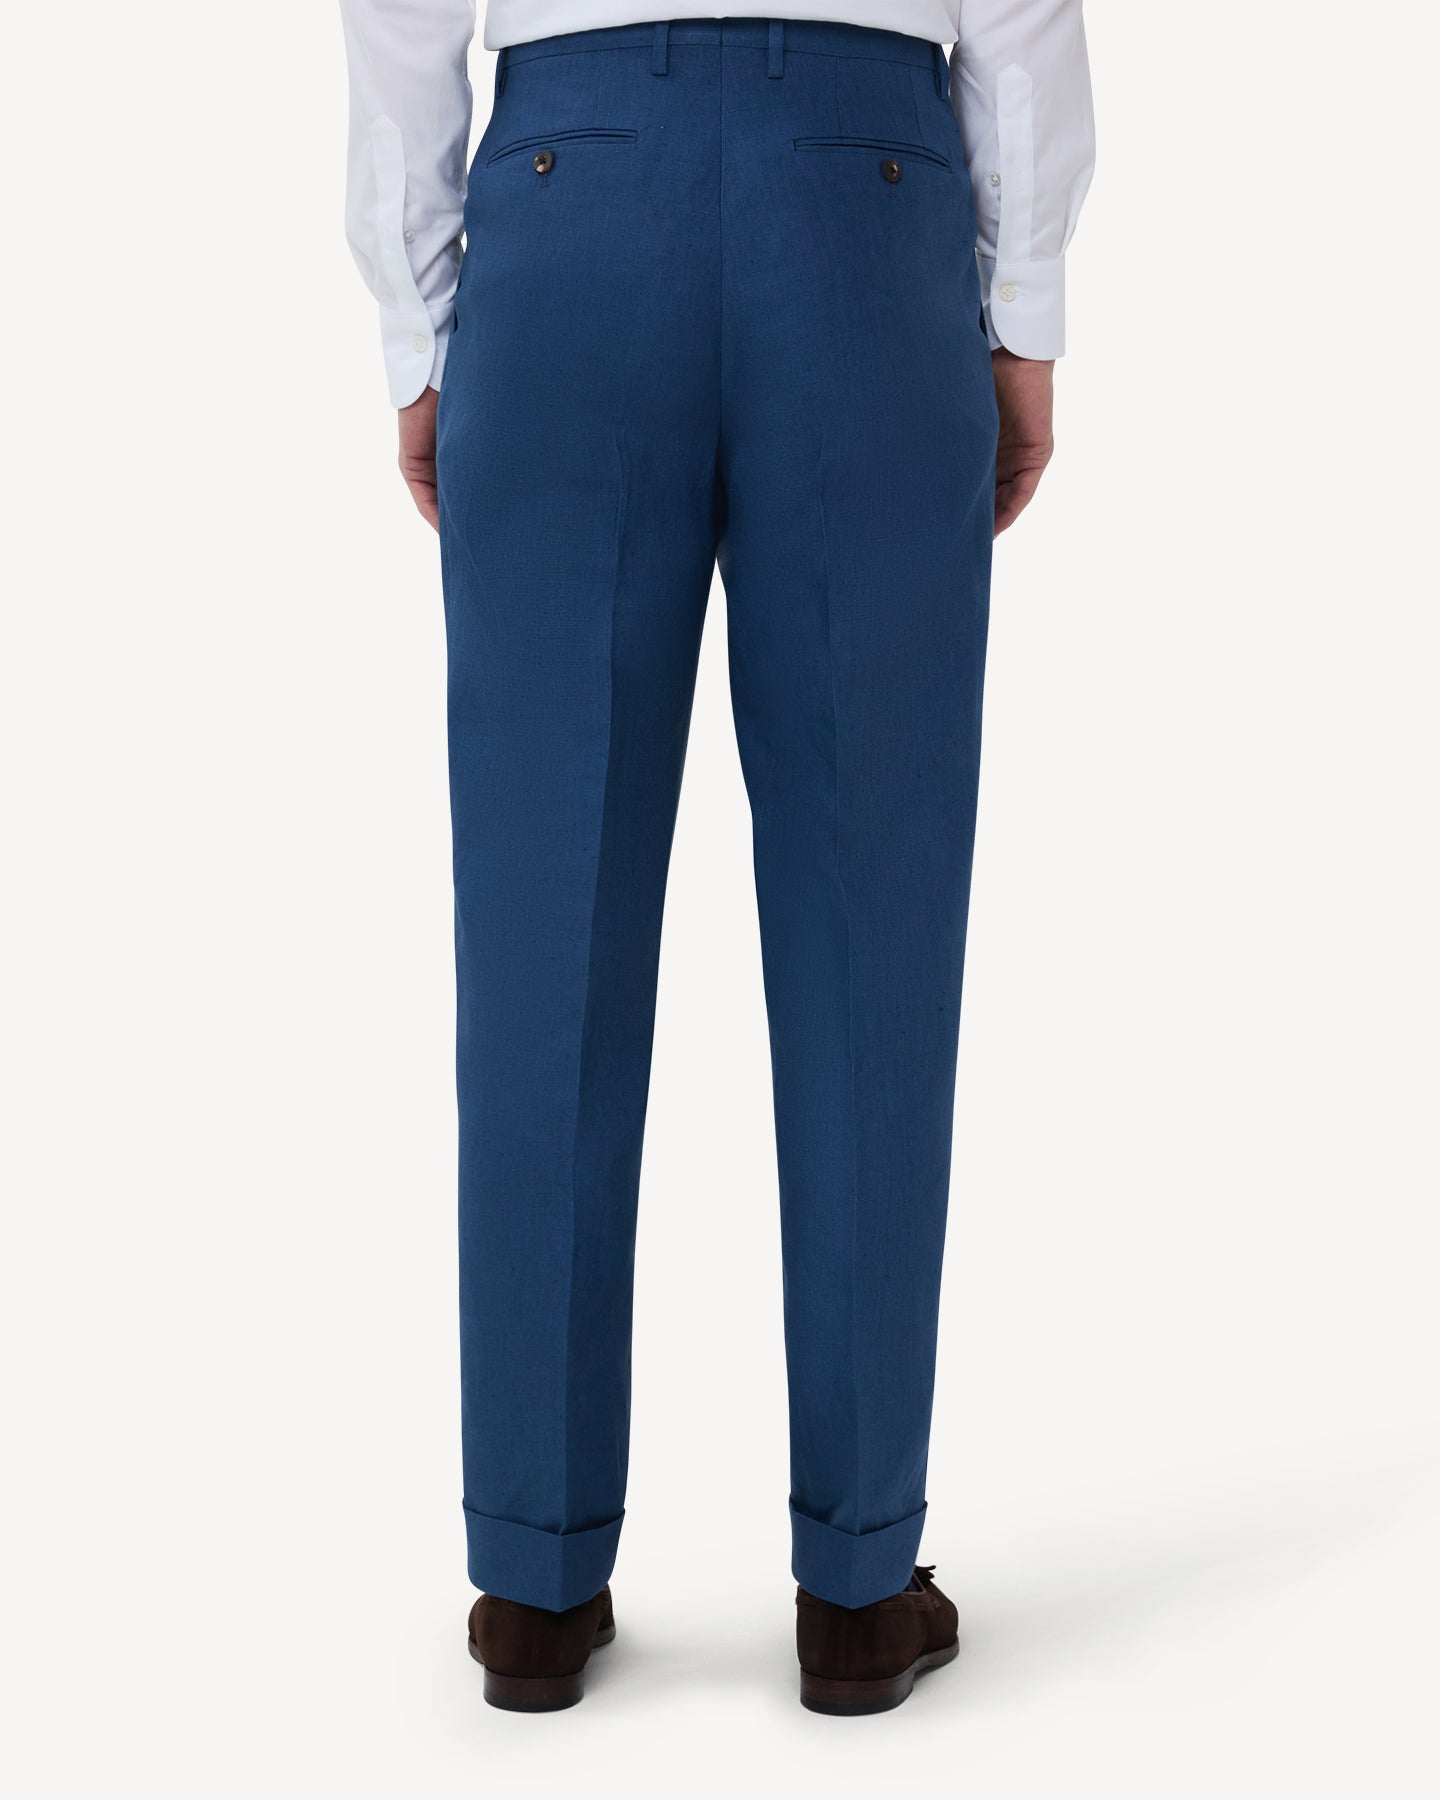 The back of blueberry linen trousers with double pleats and belt loops